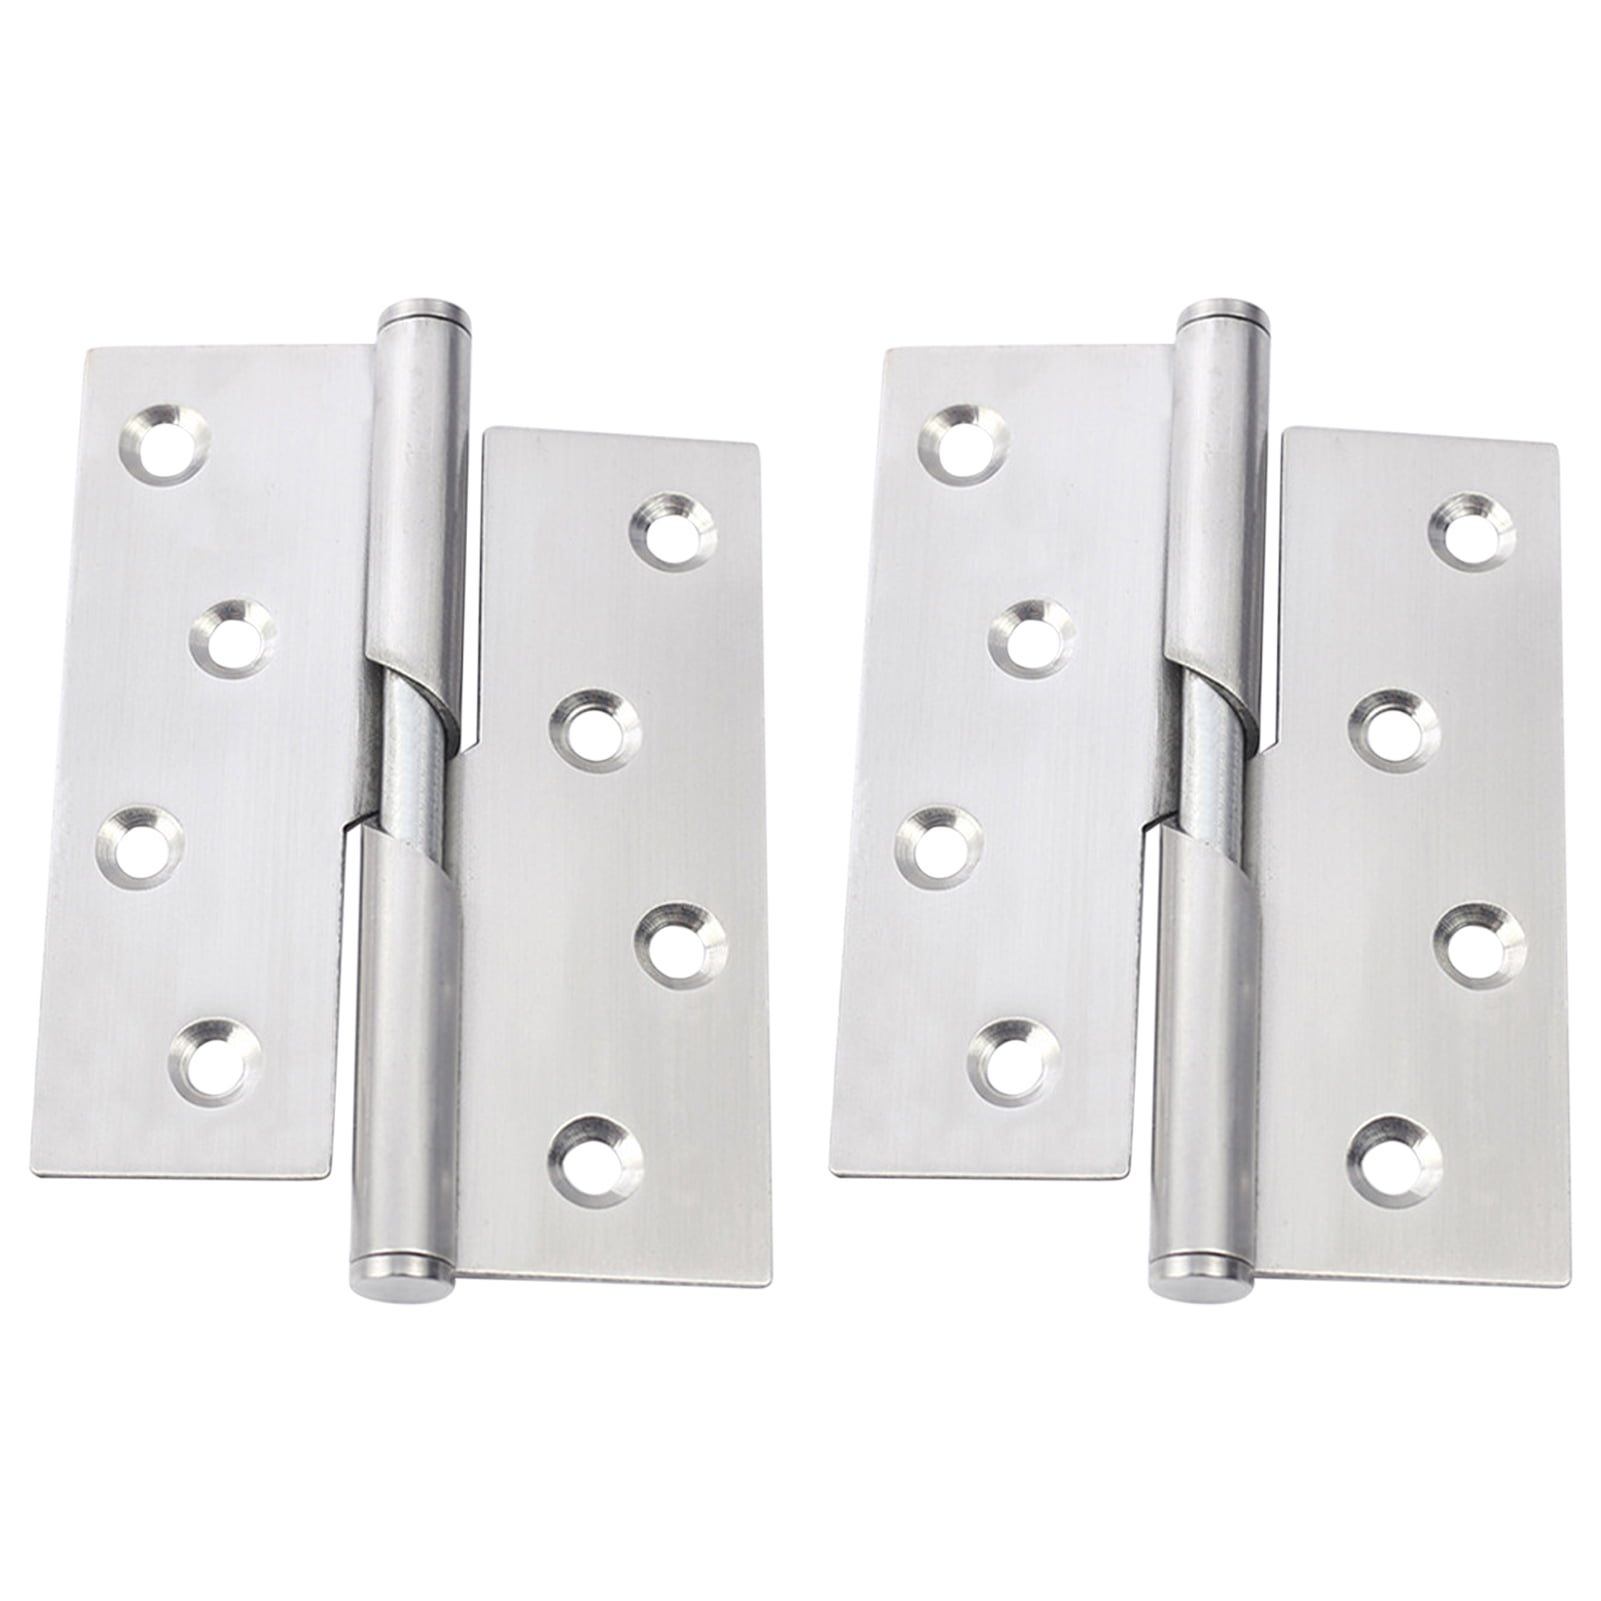 3 Size Internal Door Hinge Stainless Steel Folding Butt Hinges Fixed Pin 100MM 